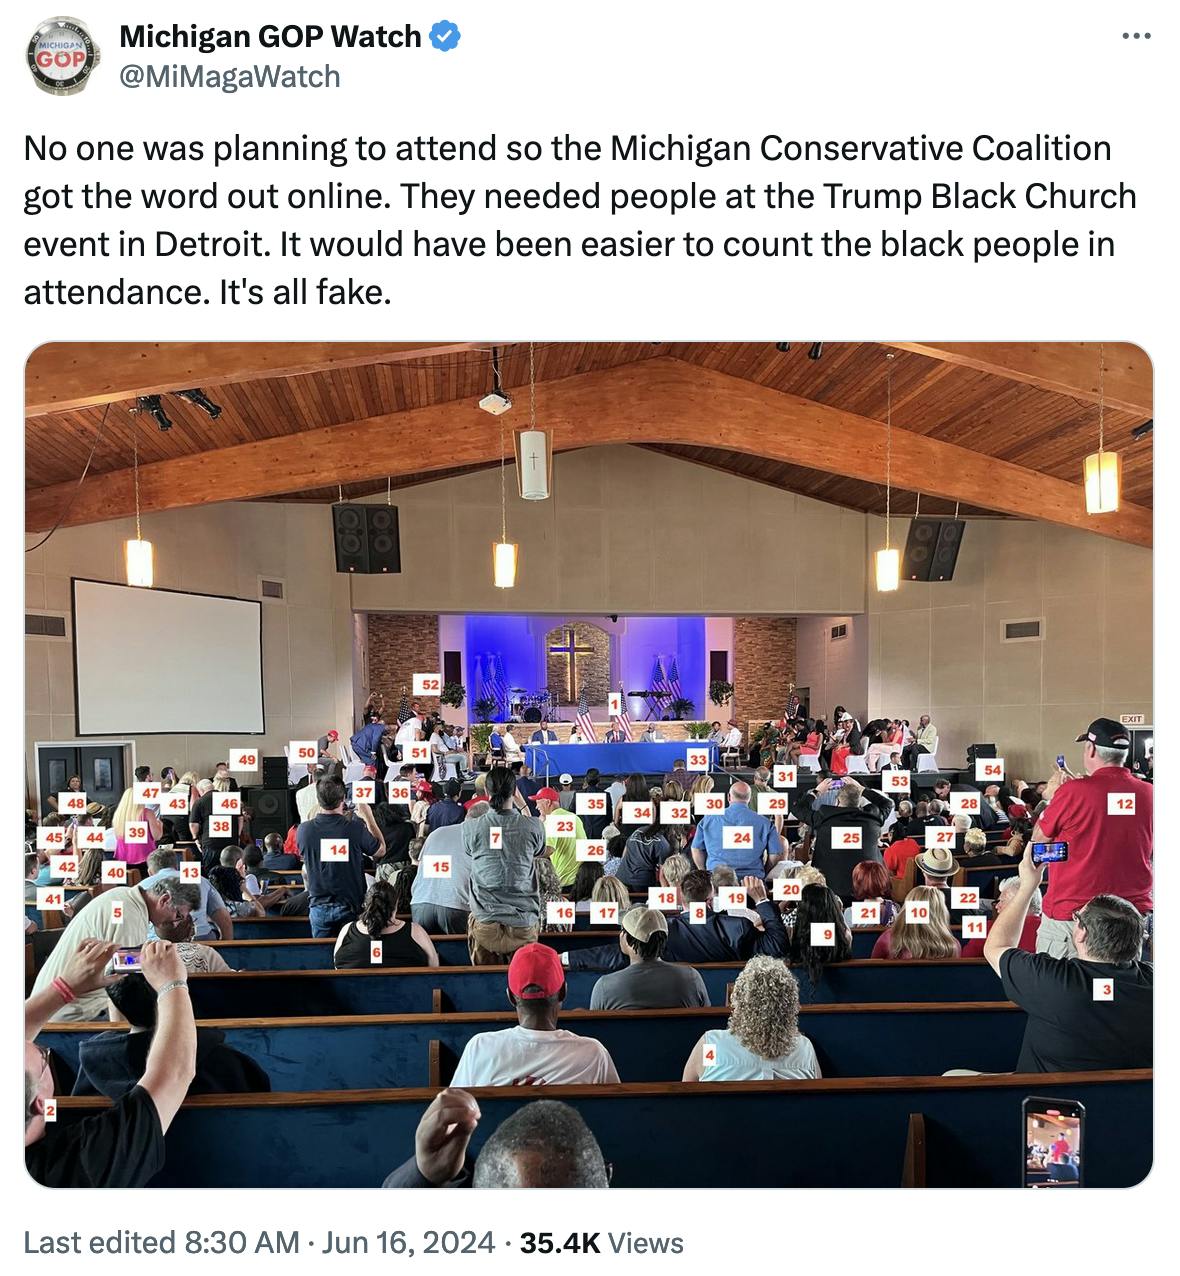 Tweet screenshot Michigan GOP Watch: No one was planning to attend so the Michigan Conservative Coalition got the word out online. They needed people at the Trump Black Church event in Detroit. It would have been easier to count the black people in attendance. It's all fake.